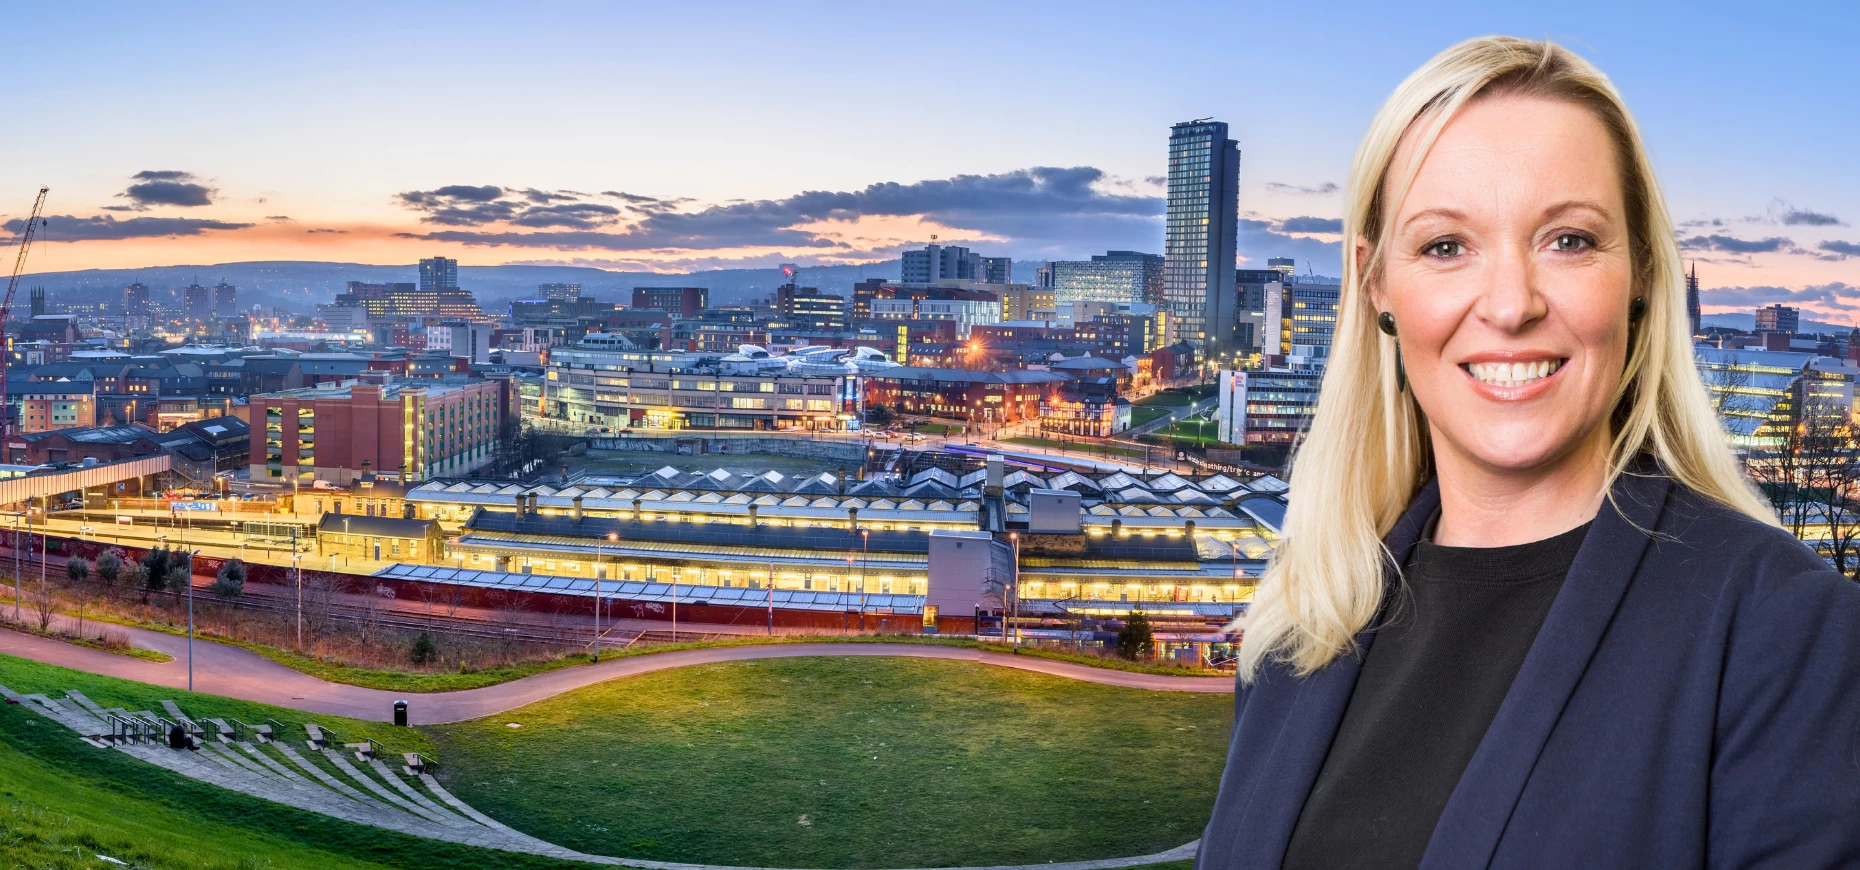 Michelle Leeson, Managing Director of GC Employment, pictured against the Sheffield skyline.